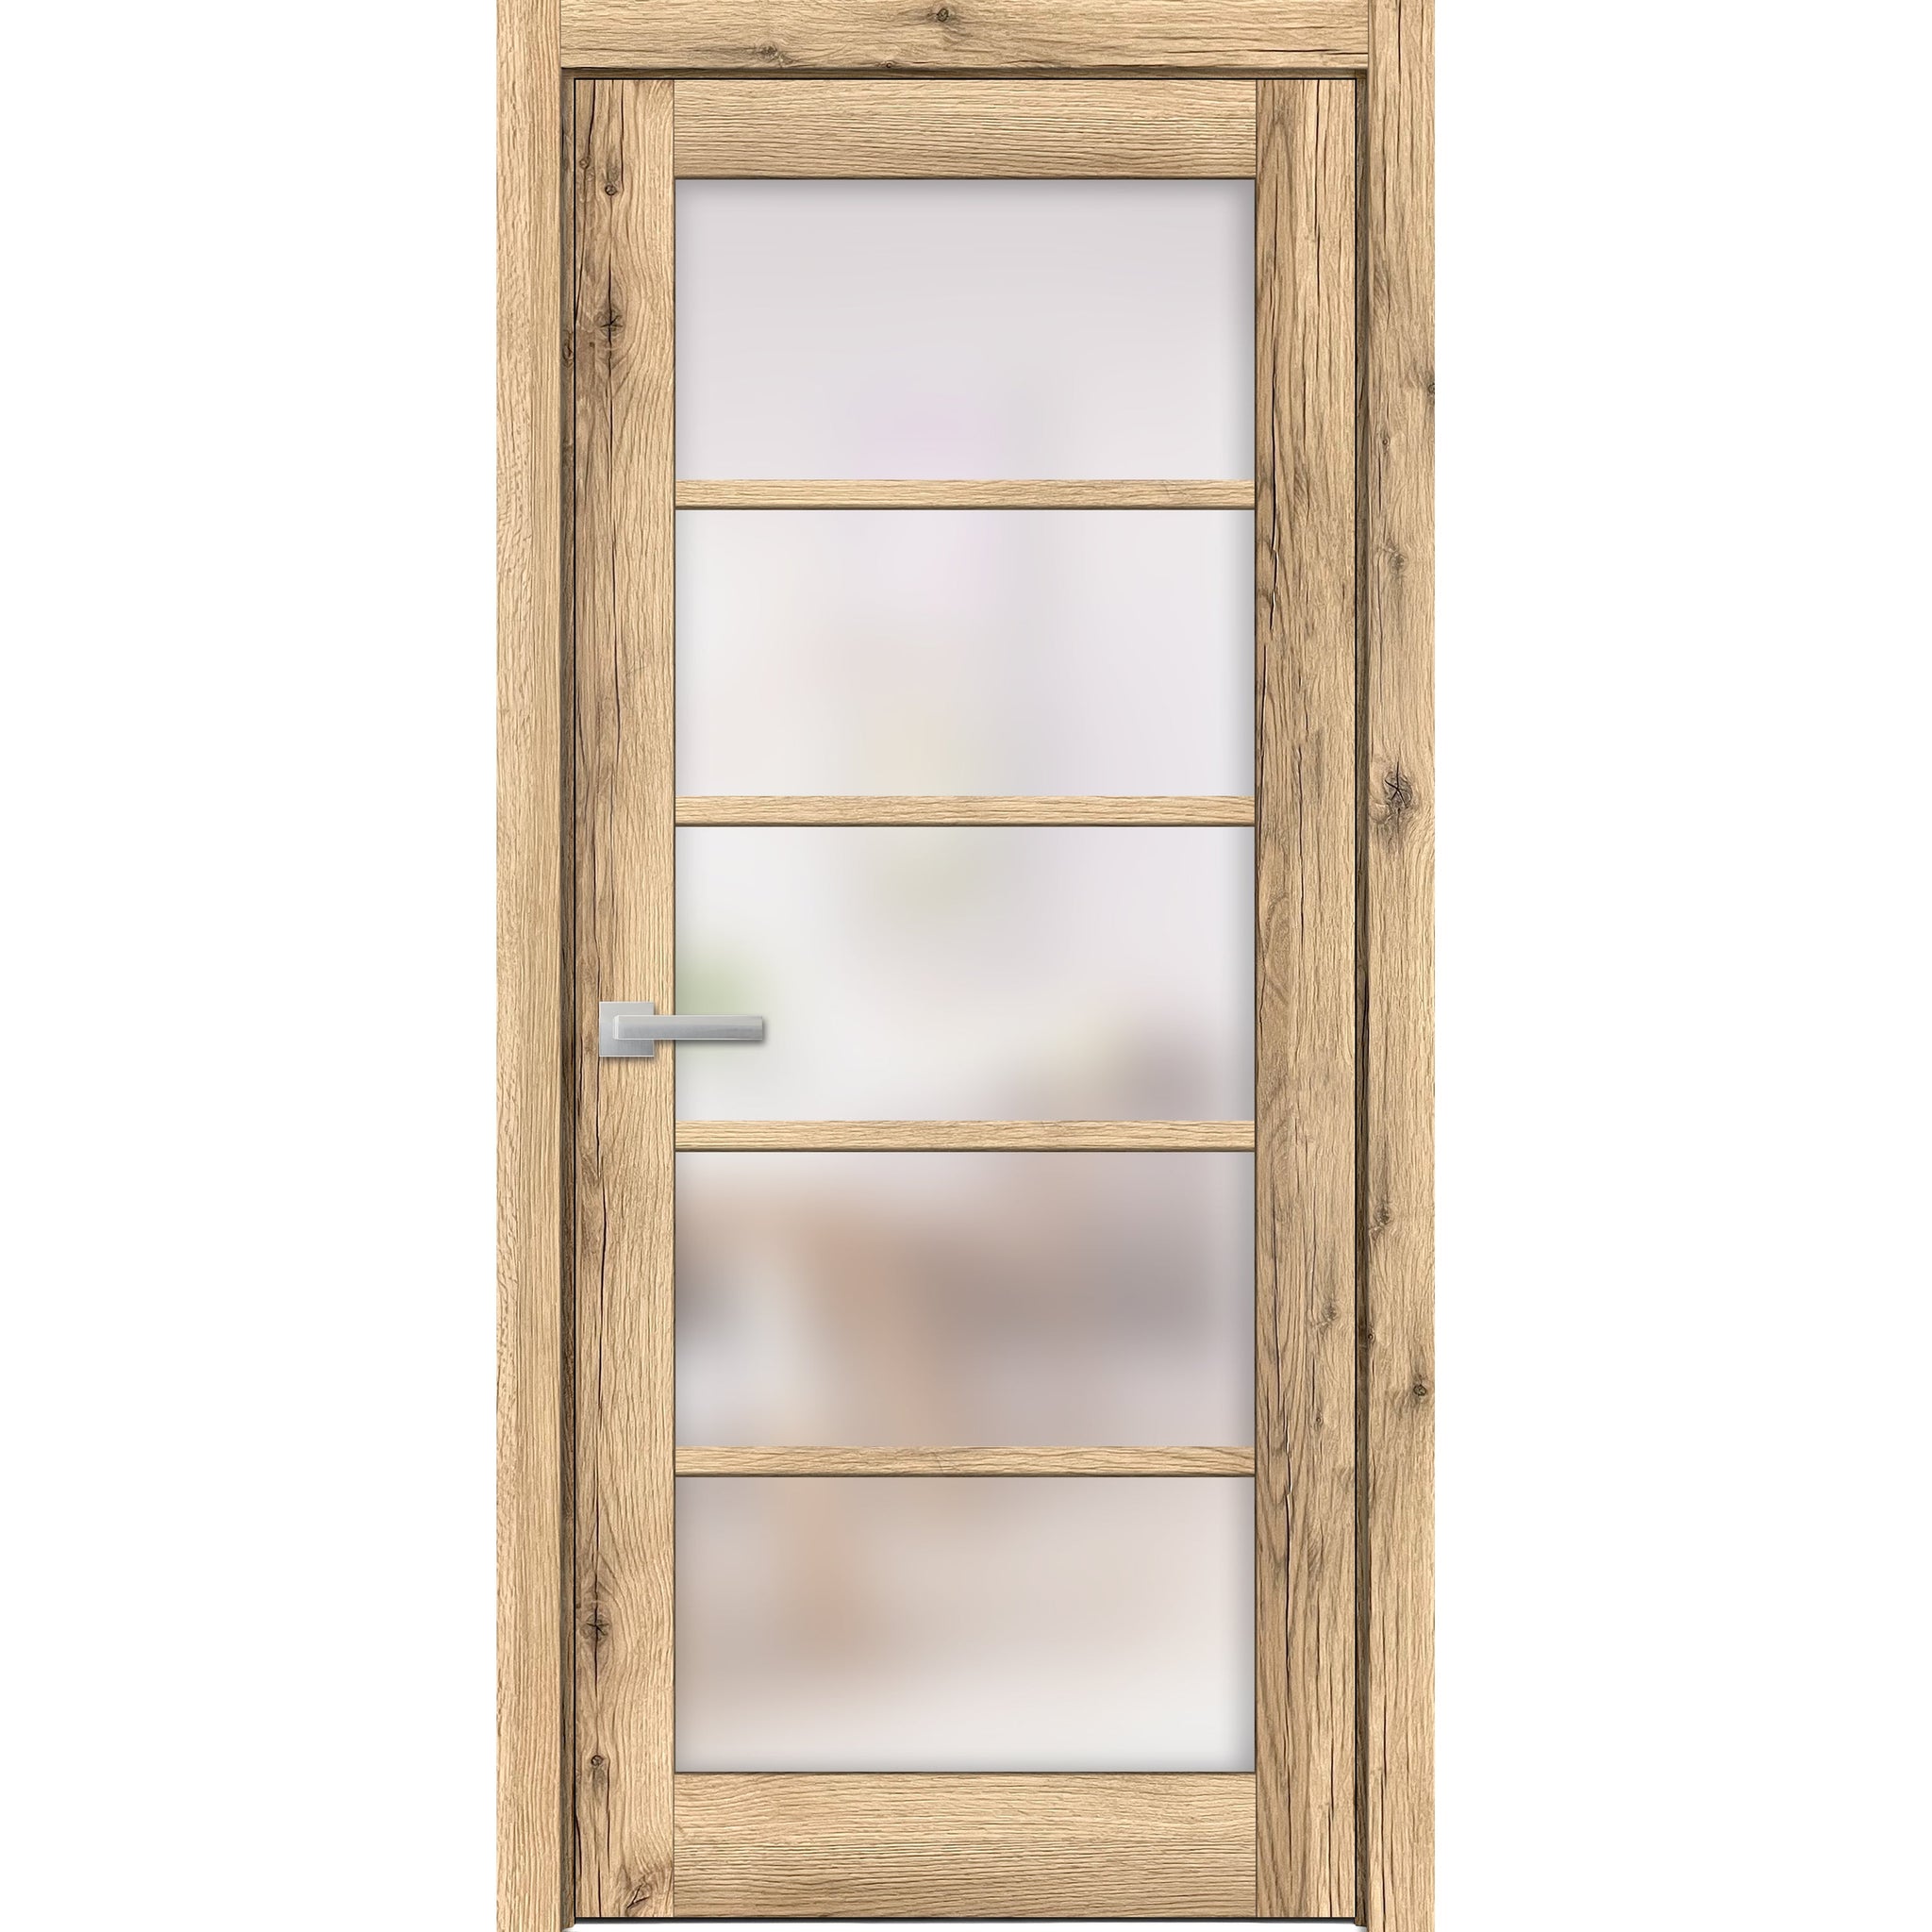 Solid French Door | Quadro 4002 Oak with Frosted Glass | Single Regular Panel Frame Trims Handle | Bathroom Bedroom Sturdy Doors